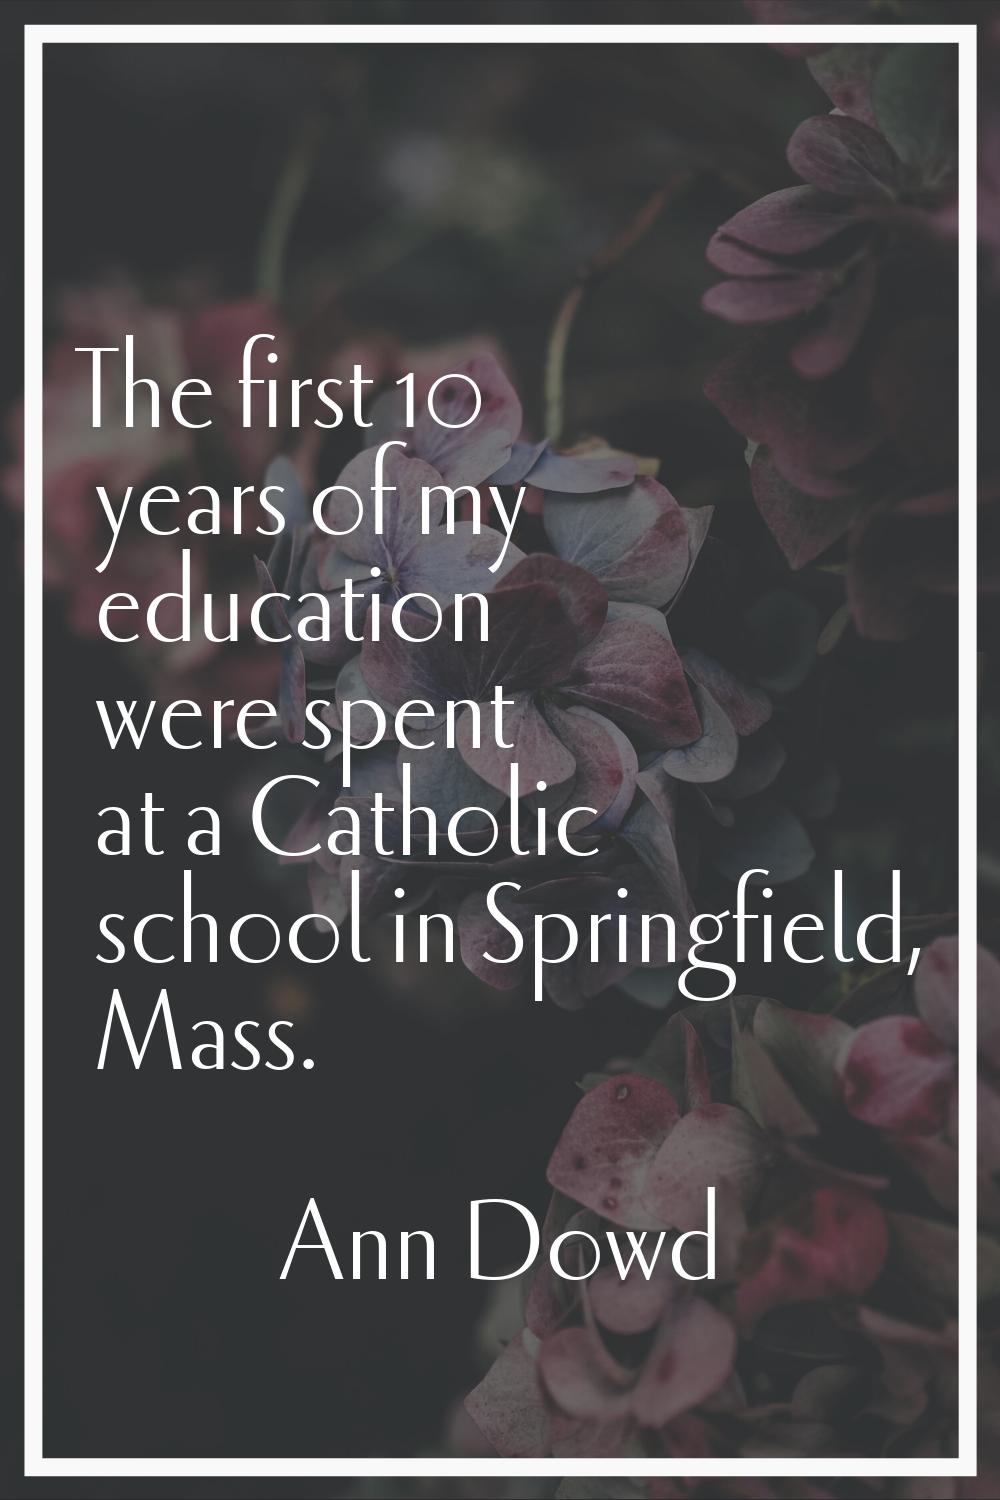 The first 10 years of my education were spent at a Catholic school in Springfield, Mass.